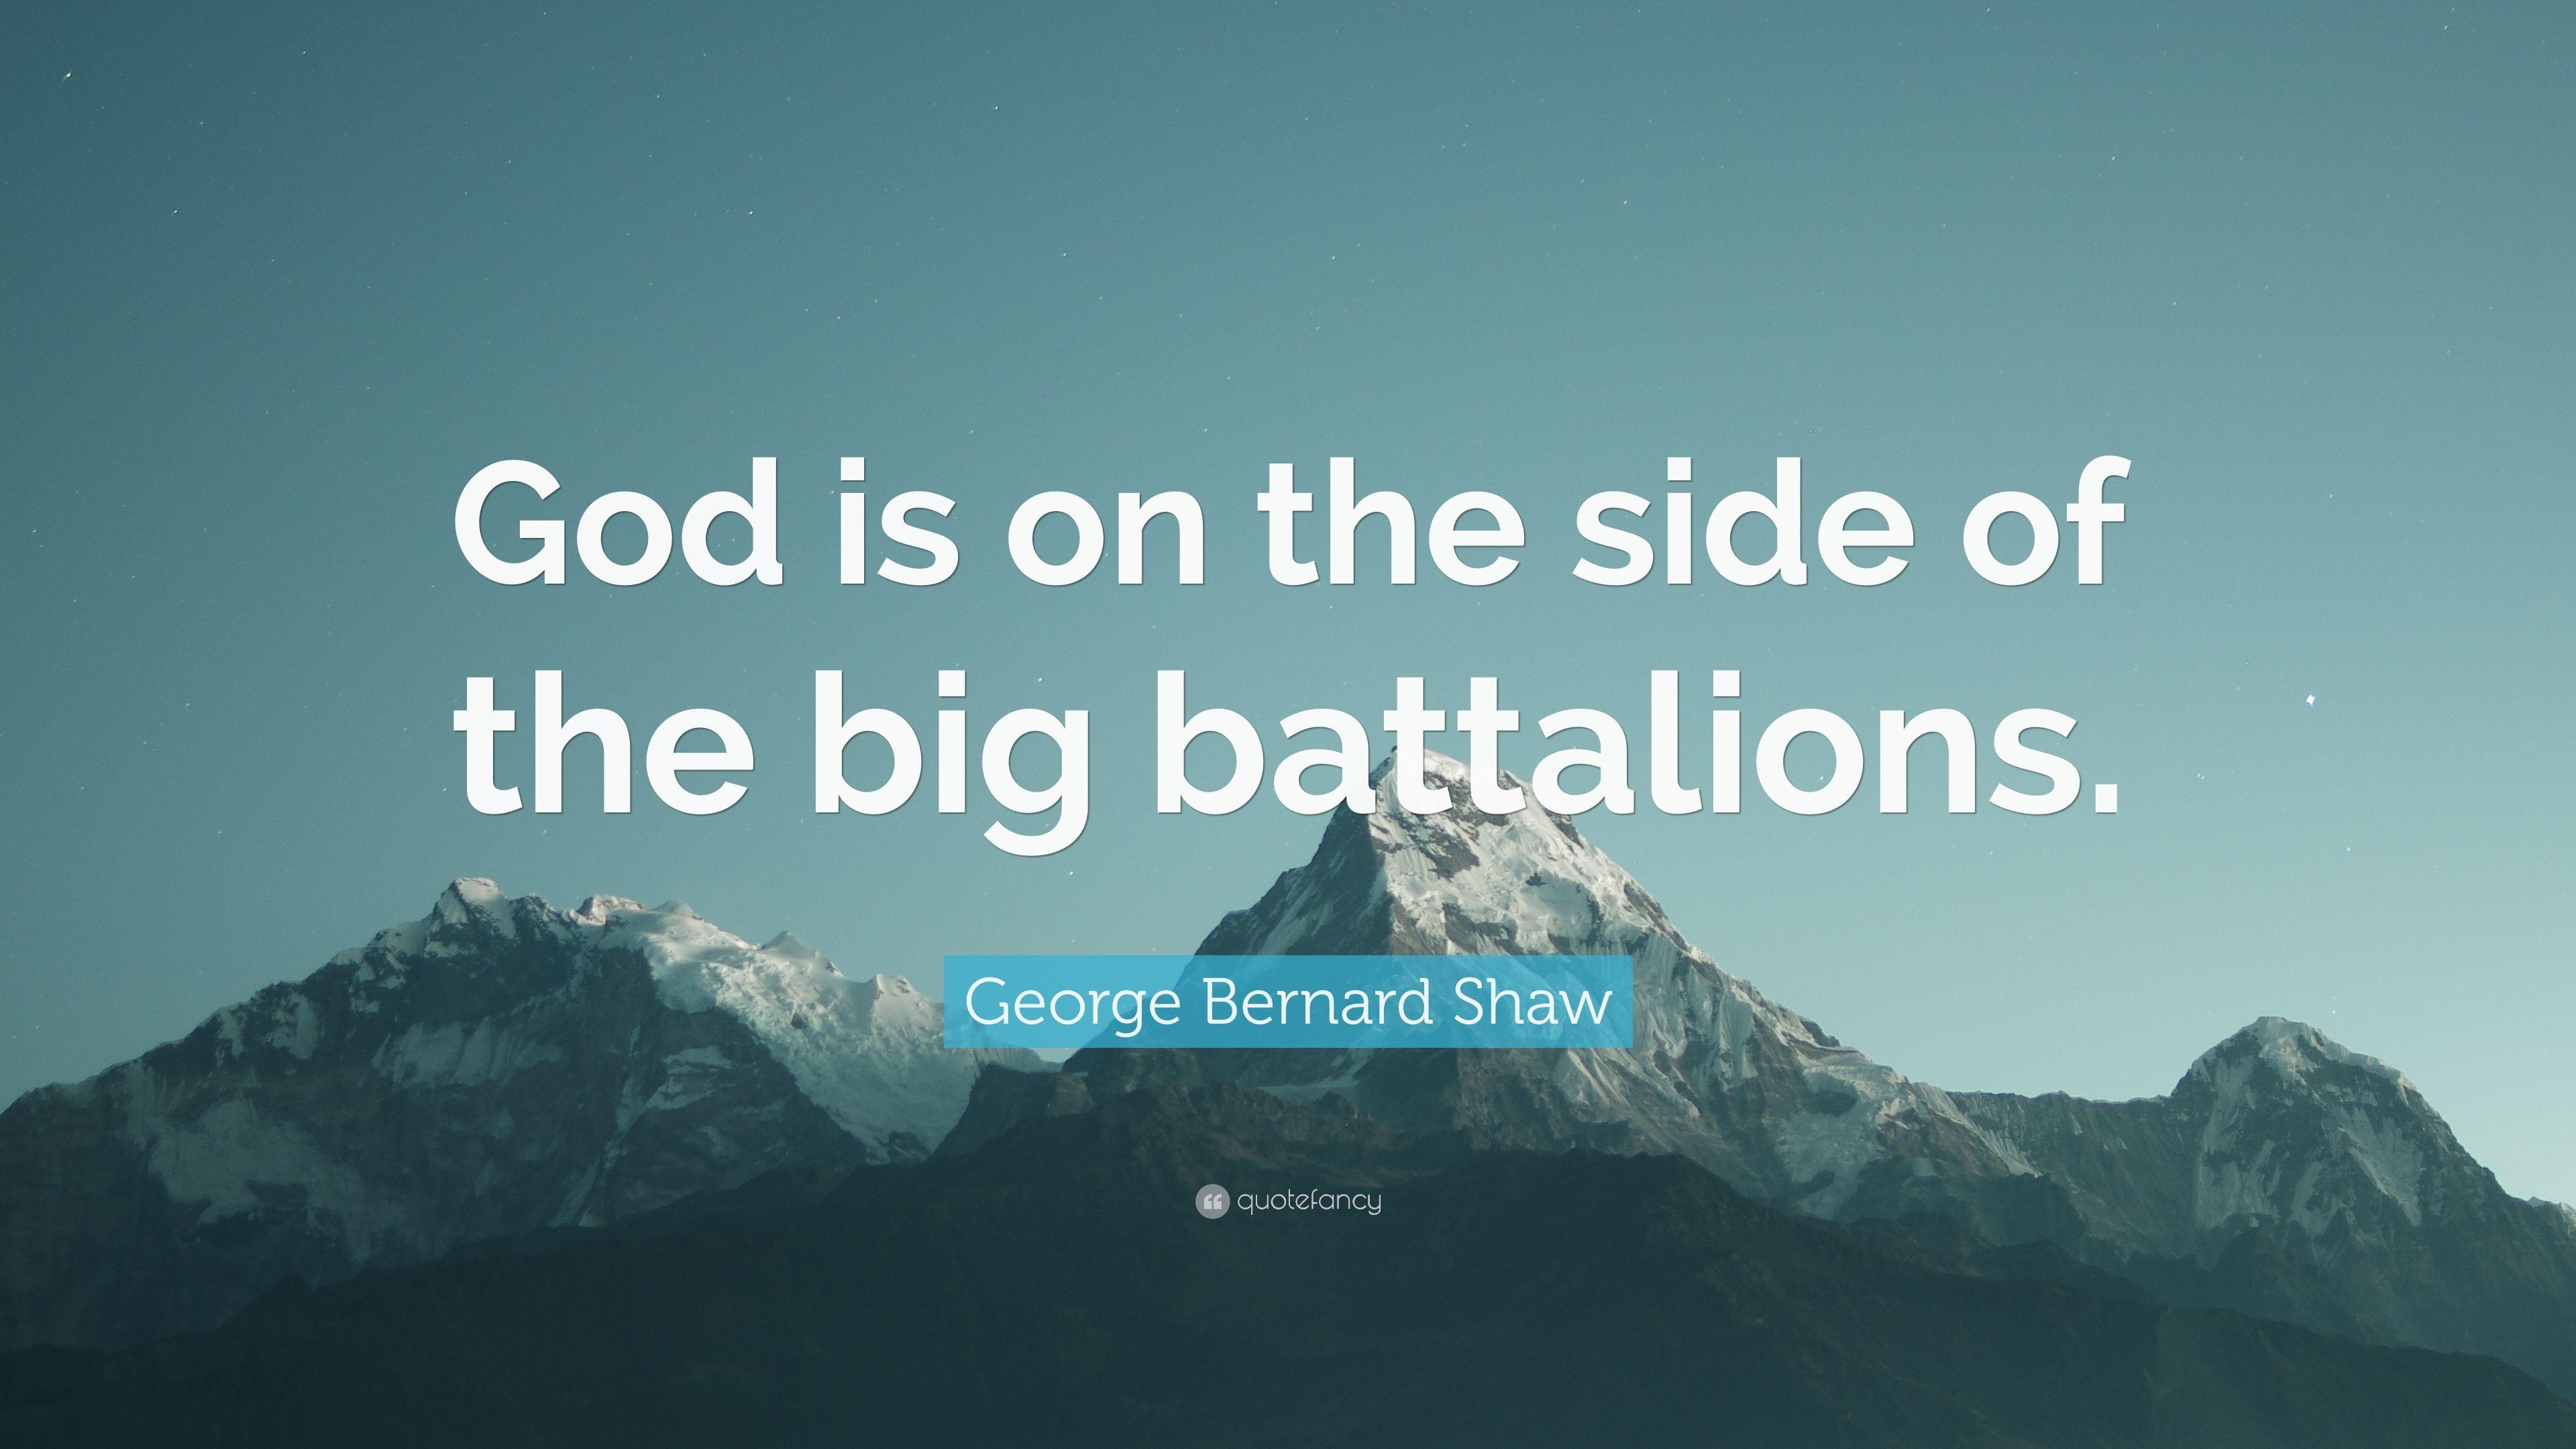 George Bernard Shaw Quote: “God is on the side of the big battalions